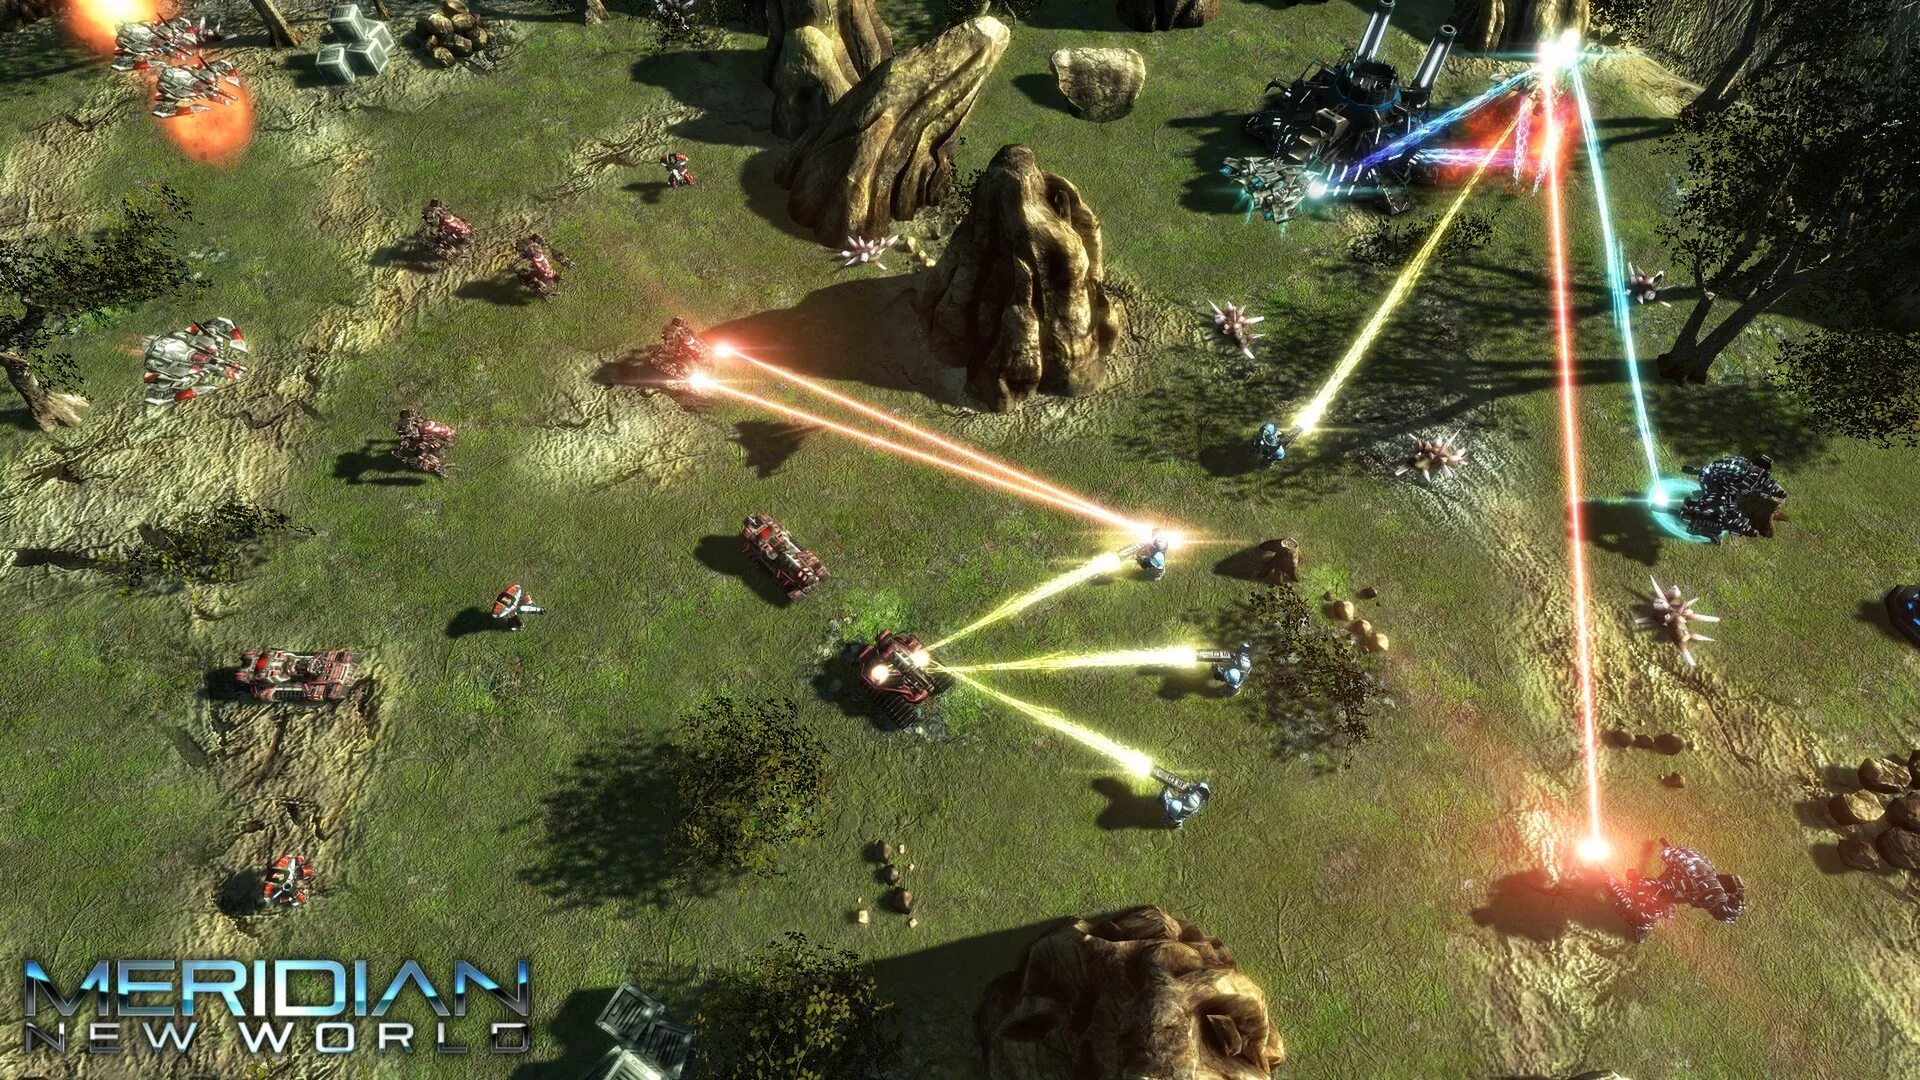 Rts. RTS игр (real-time Strategy). Meridian игра. Meridian: New World. Игра на ПК Meridian New World.